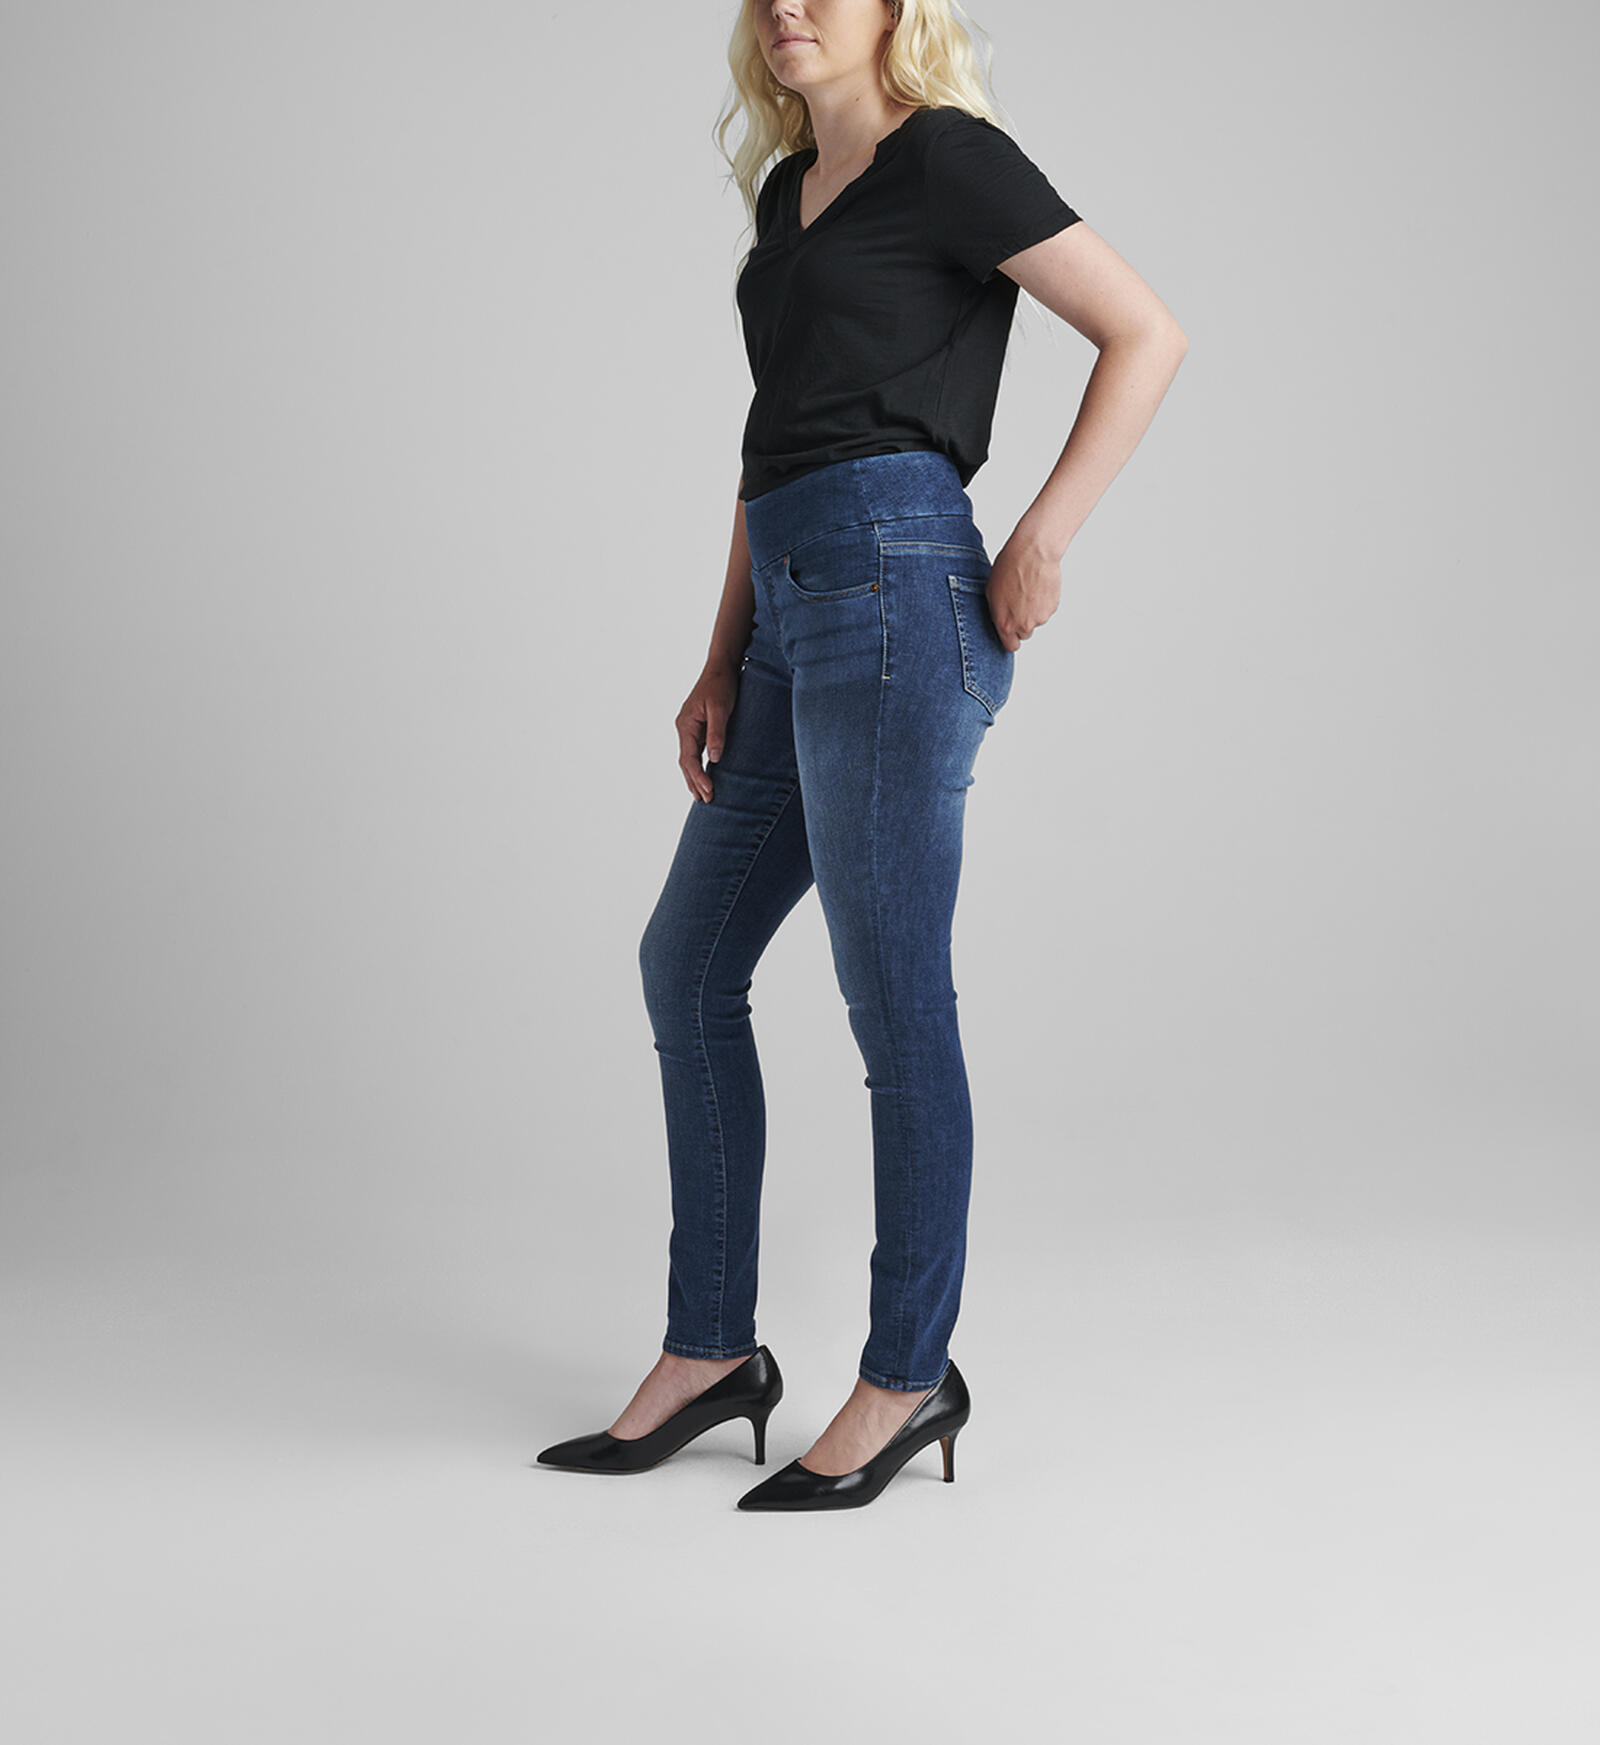 Buy Nora Mid Rise Skinny Pull-On Jeans for USD 69.00